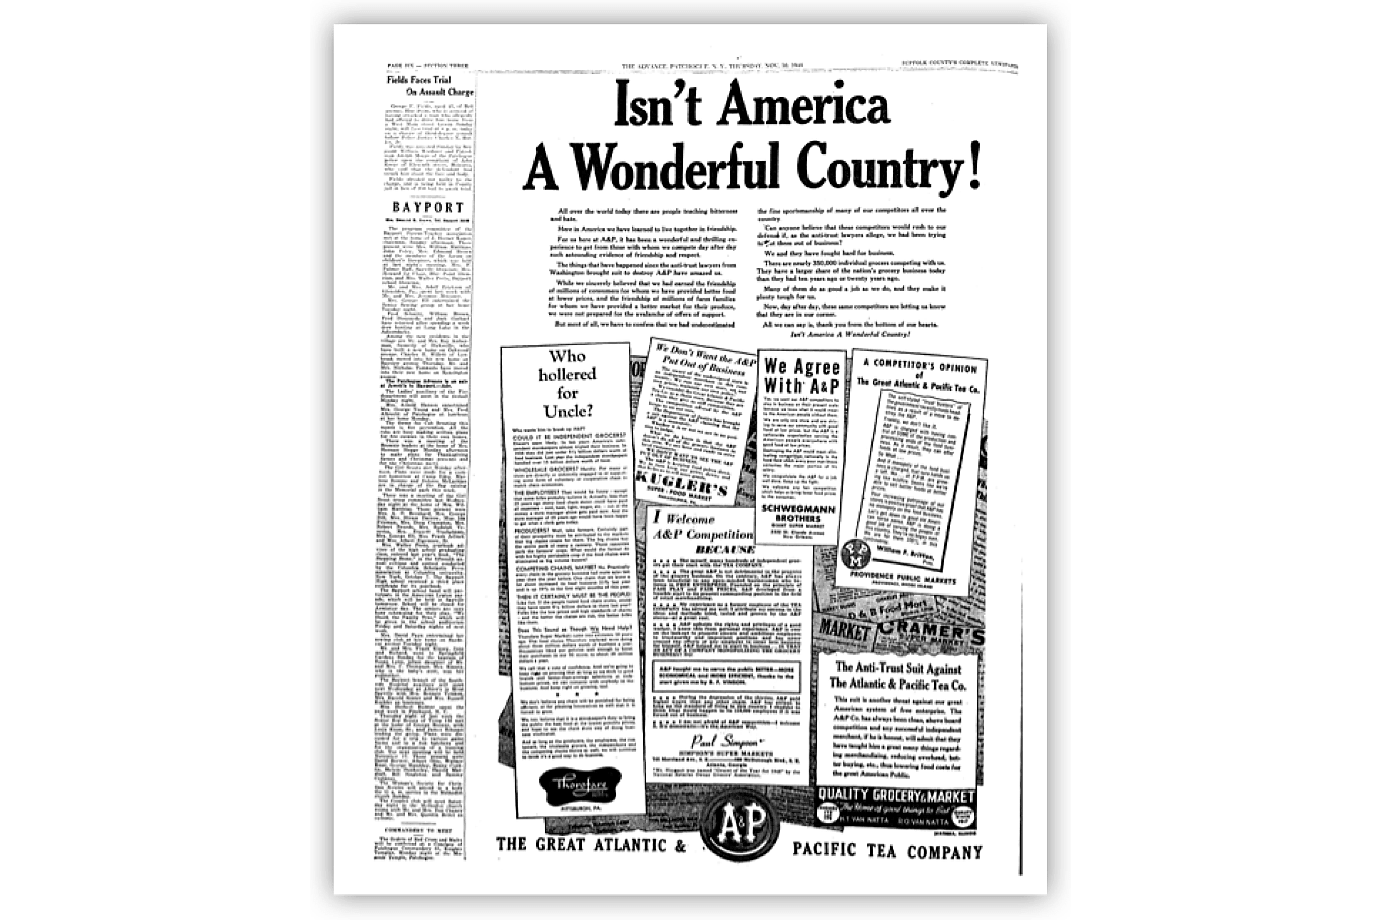 "Isn't America a Wonderful Country!" Newspaper Ad for A&P